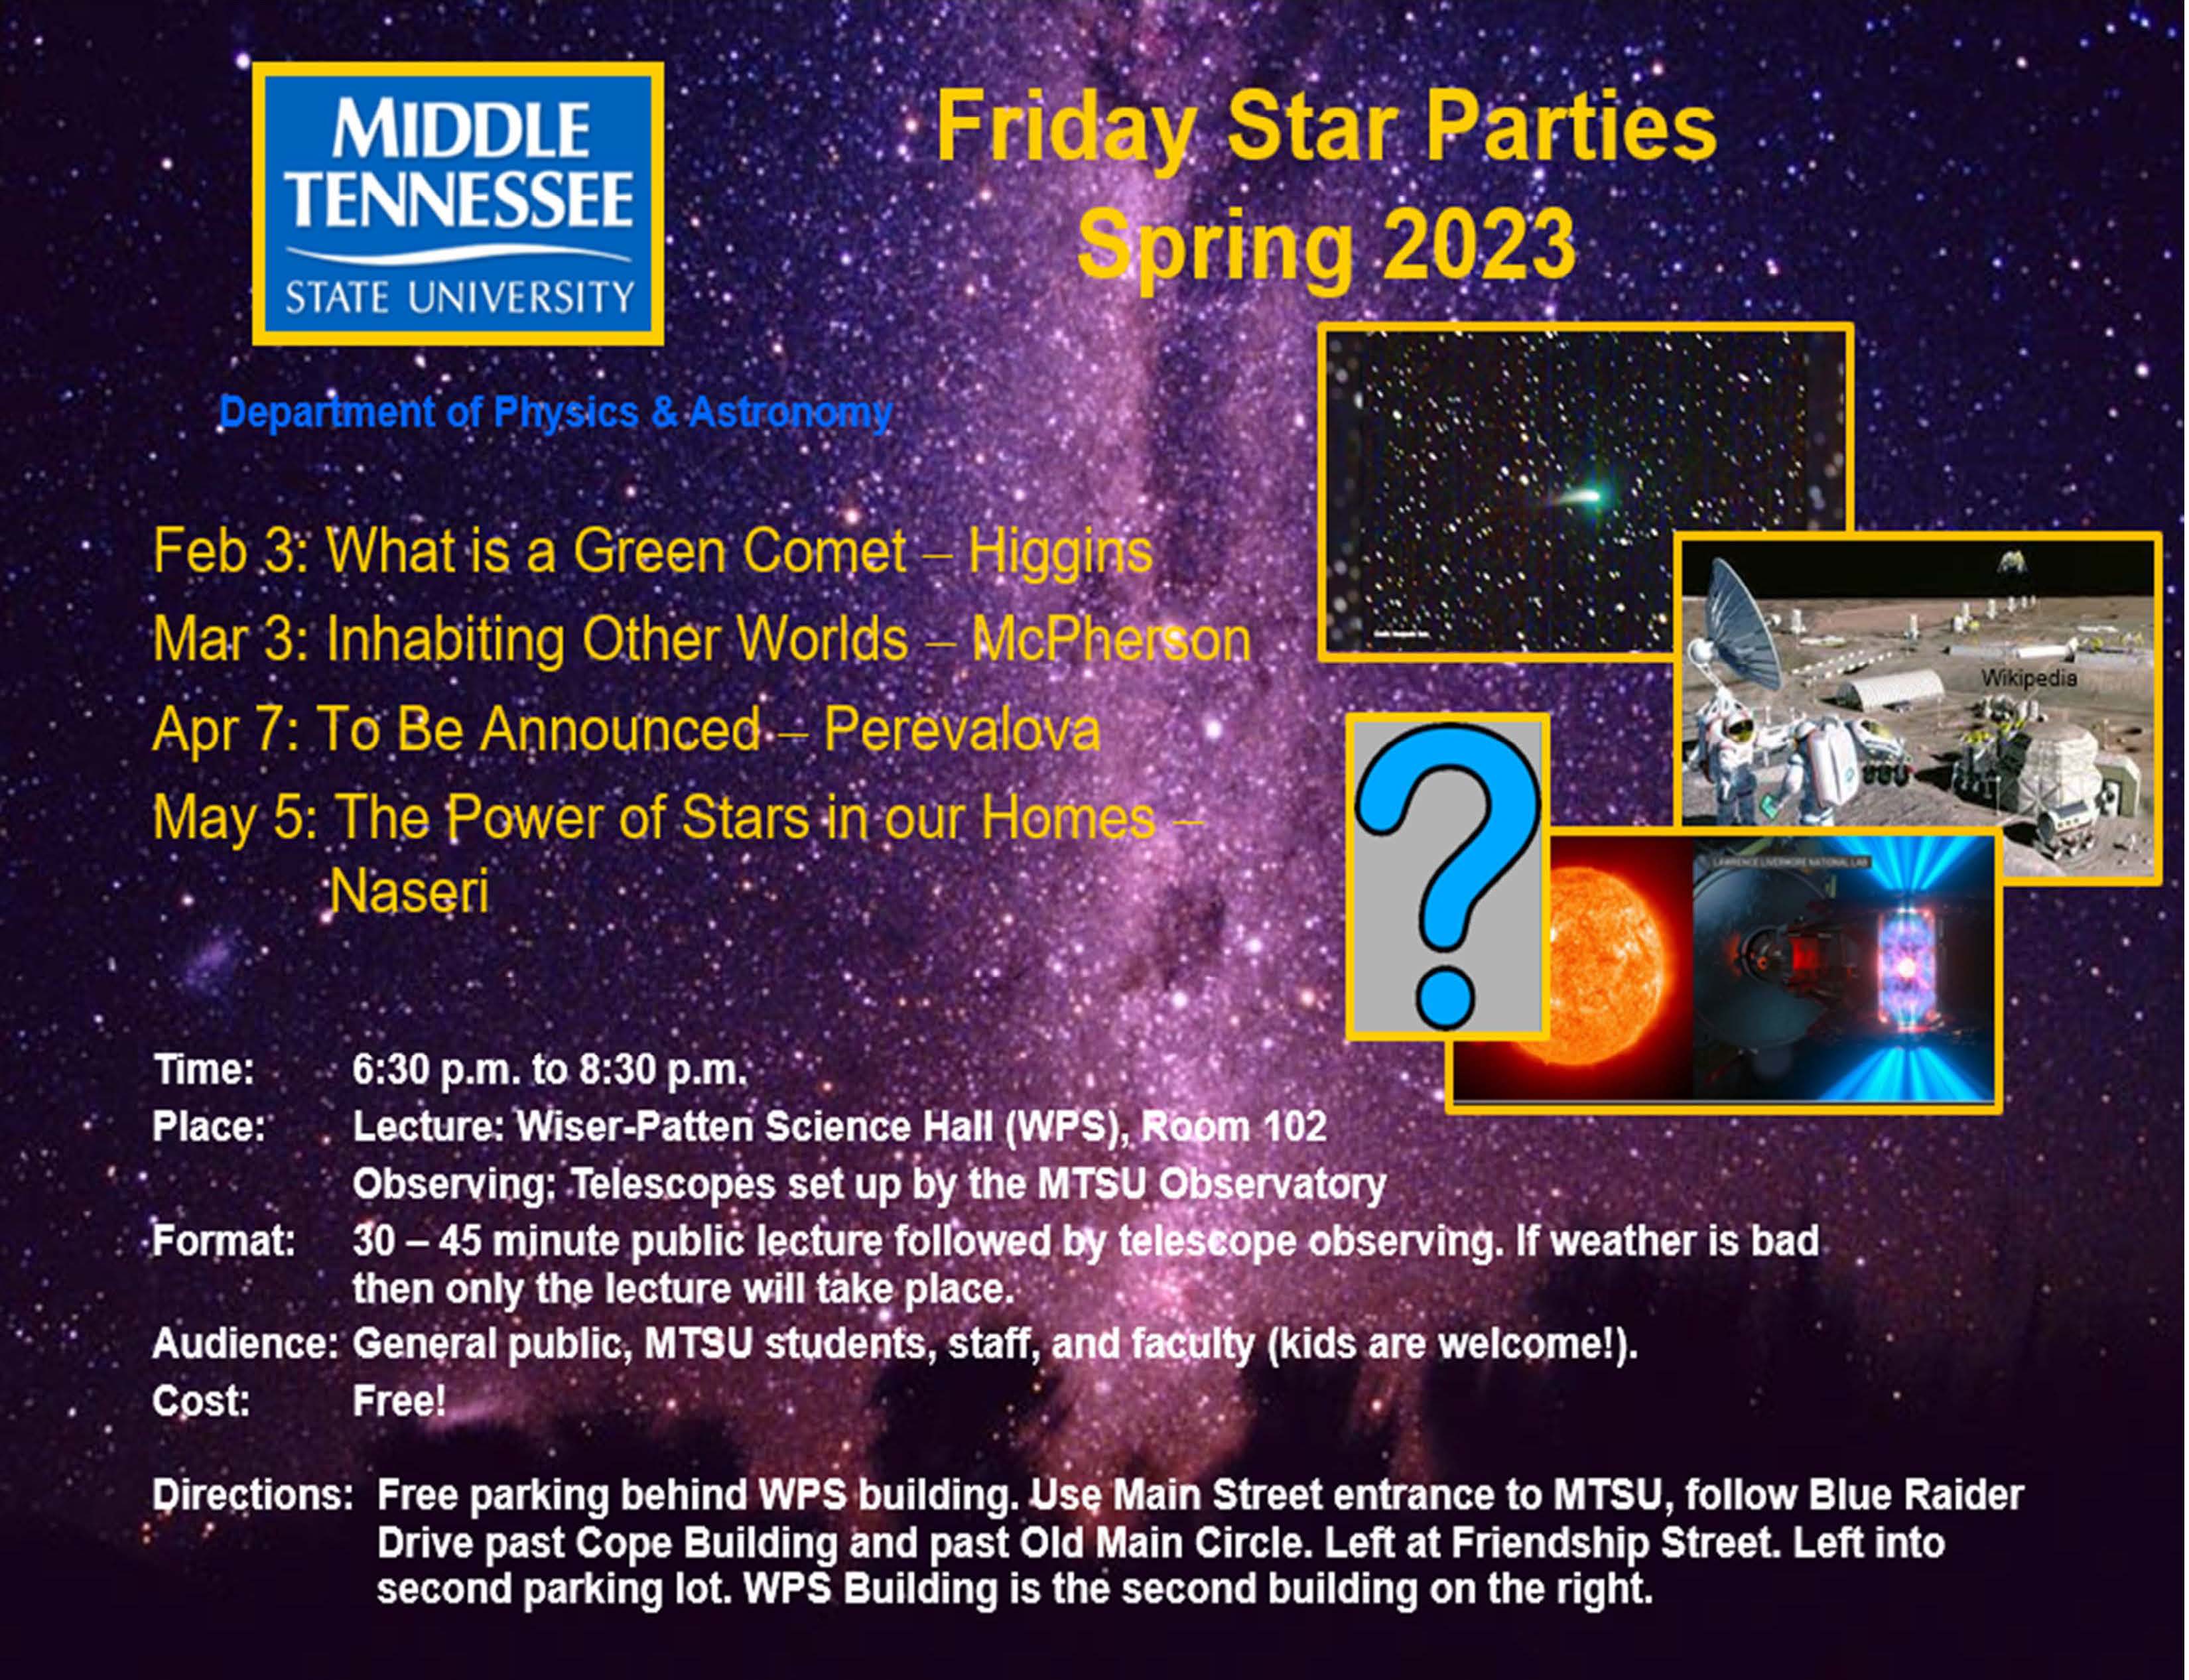 Spring 2023 Friday Star Party graphic